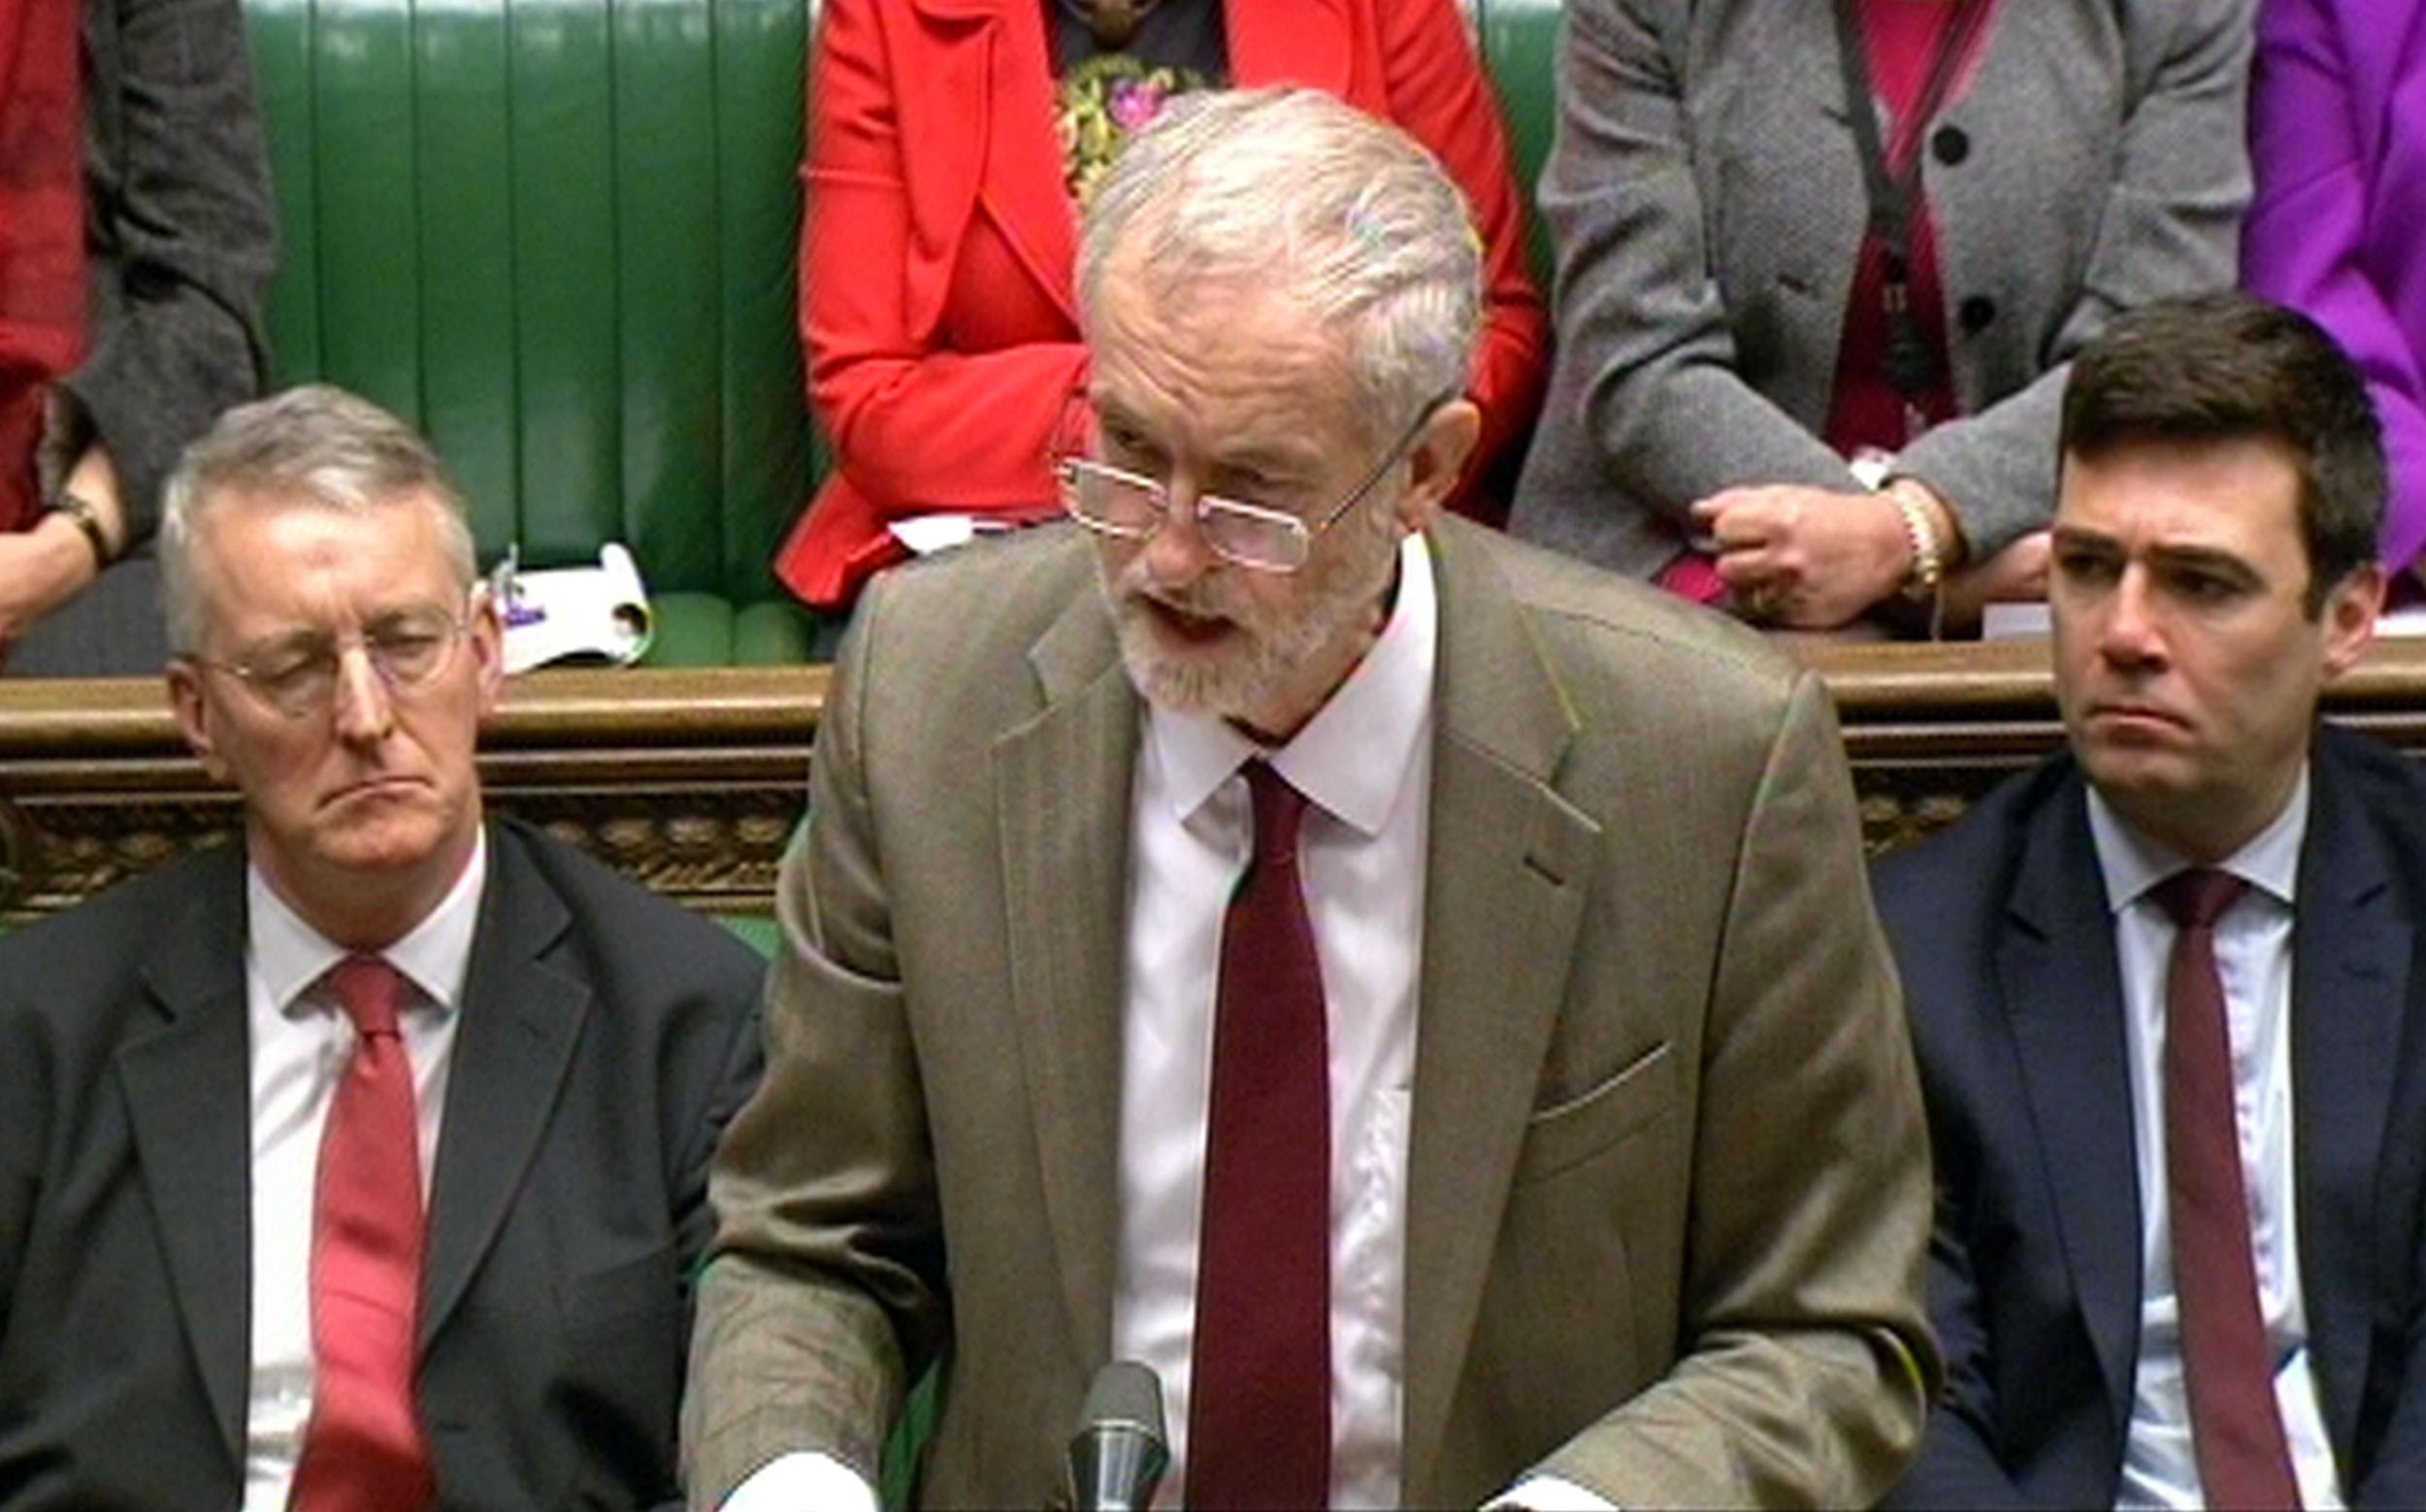 Jeremy Corbyn has said Labour would only support air strikes in Syria if the Government won backing from the UN